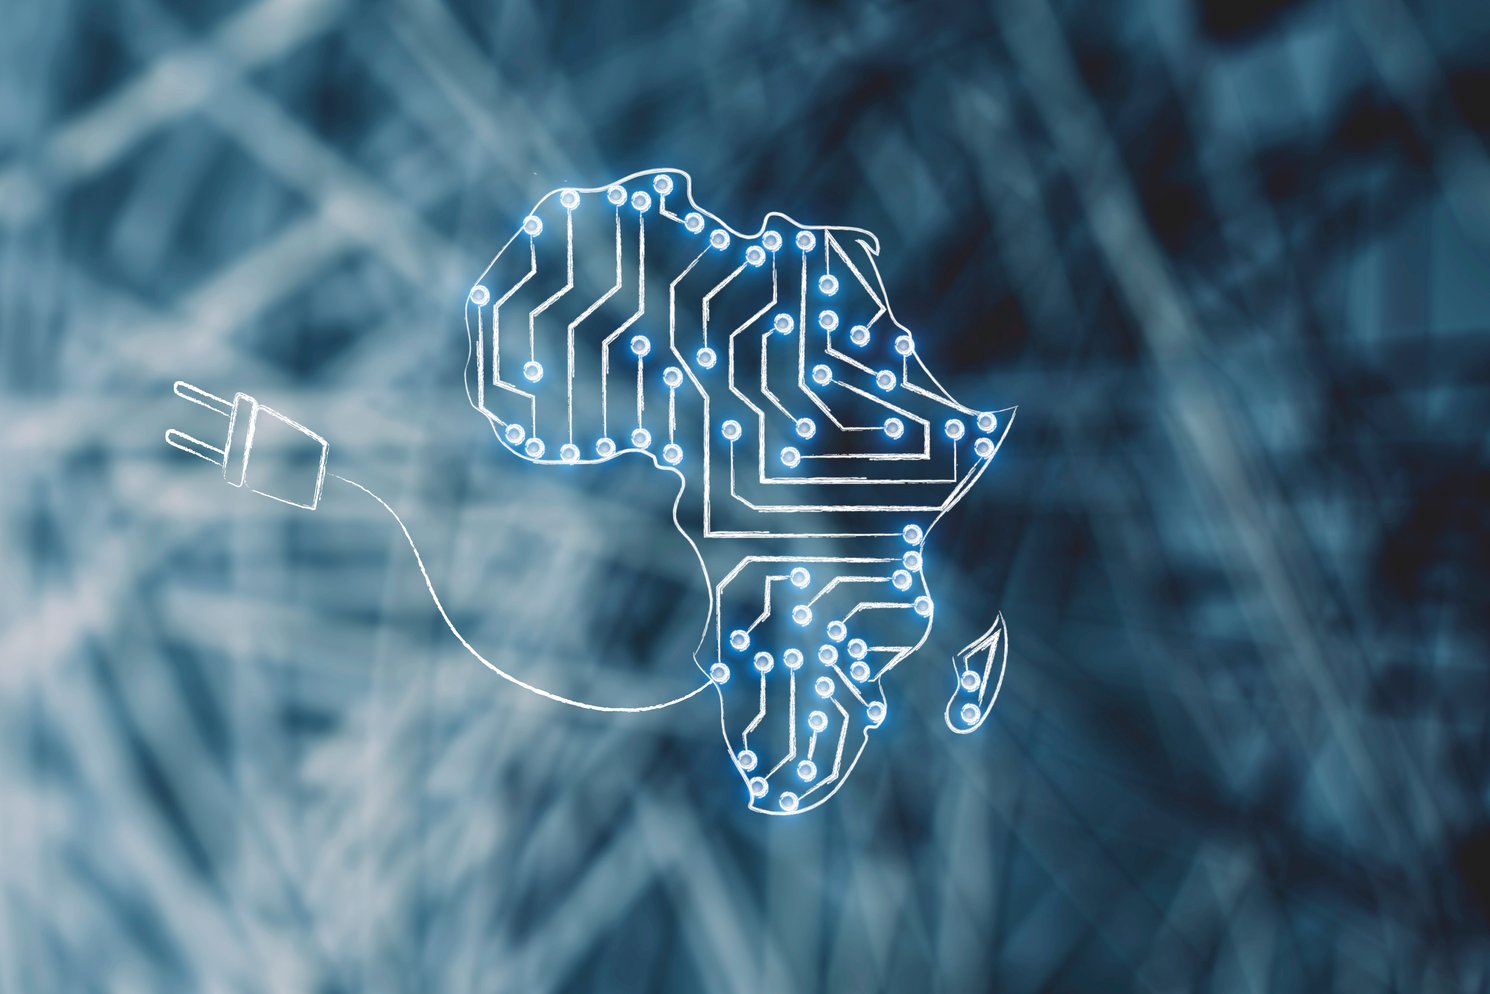 Africa Requires $6 Billion Annually for Digital Infrastructure to Connect Millions of Citizens